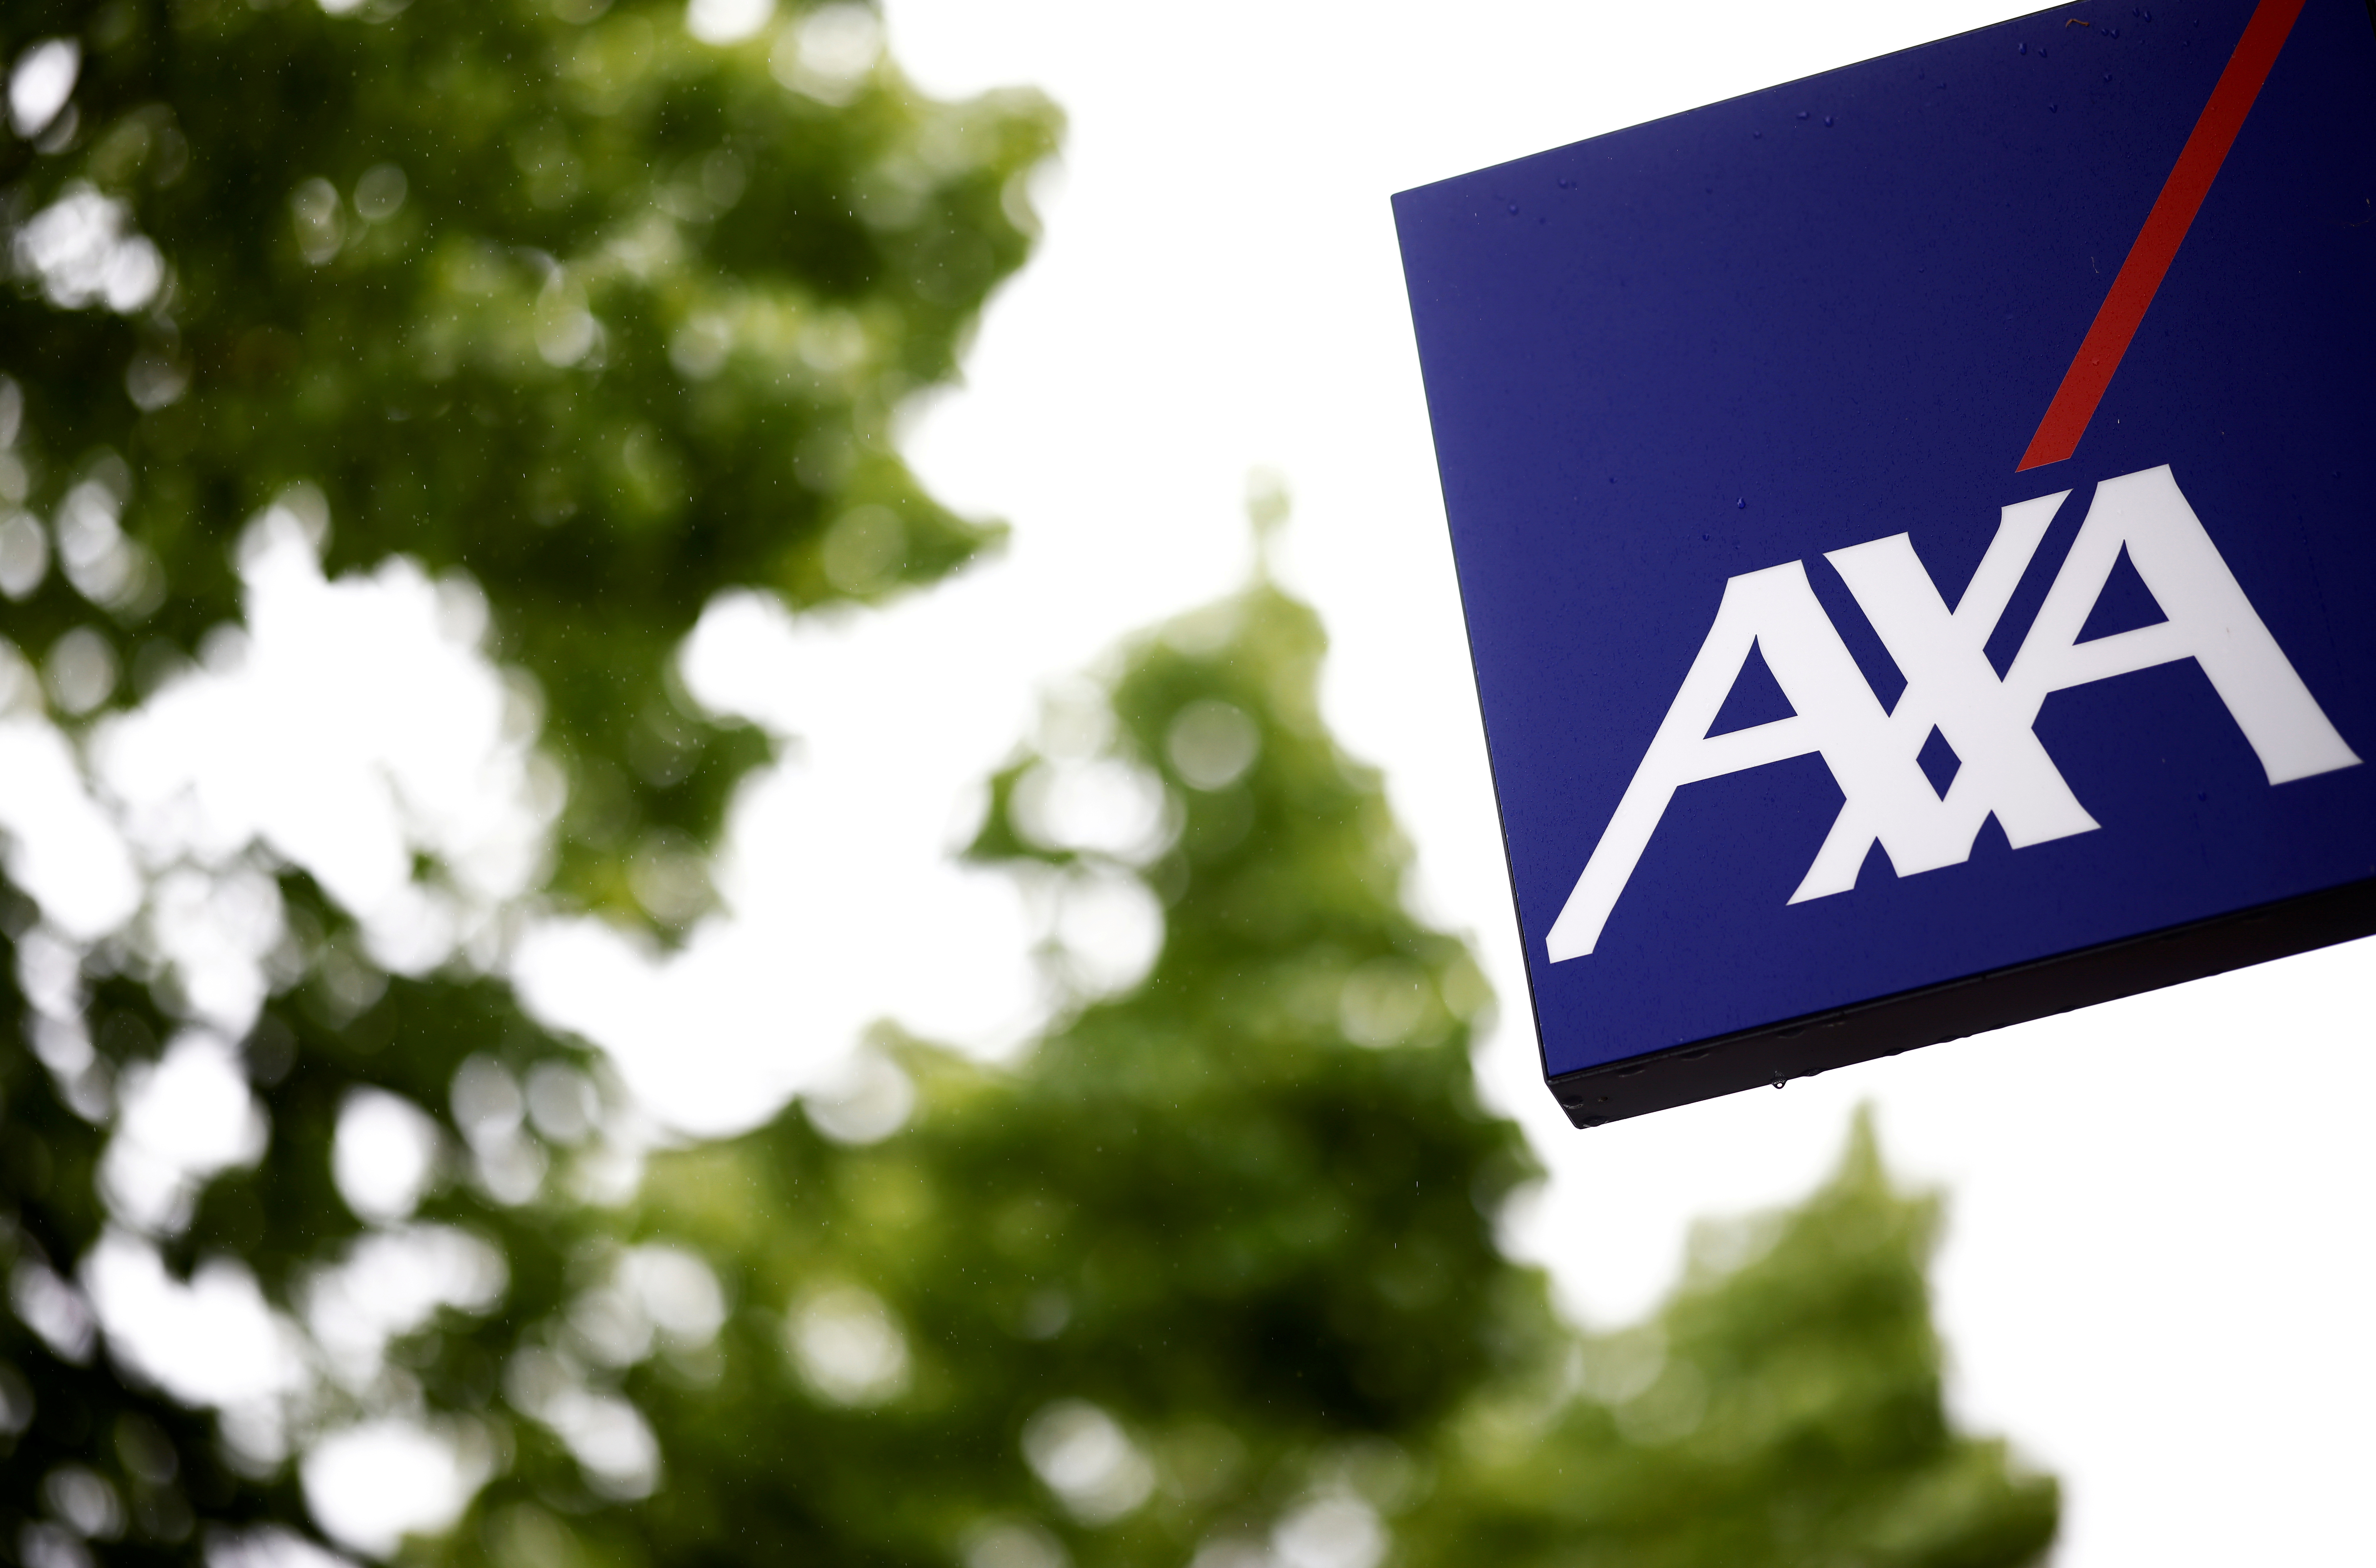 The logo of French Insurer Axa is seen outside a building in Les Sorinieres near Nantes